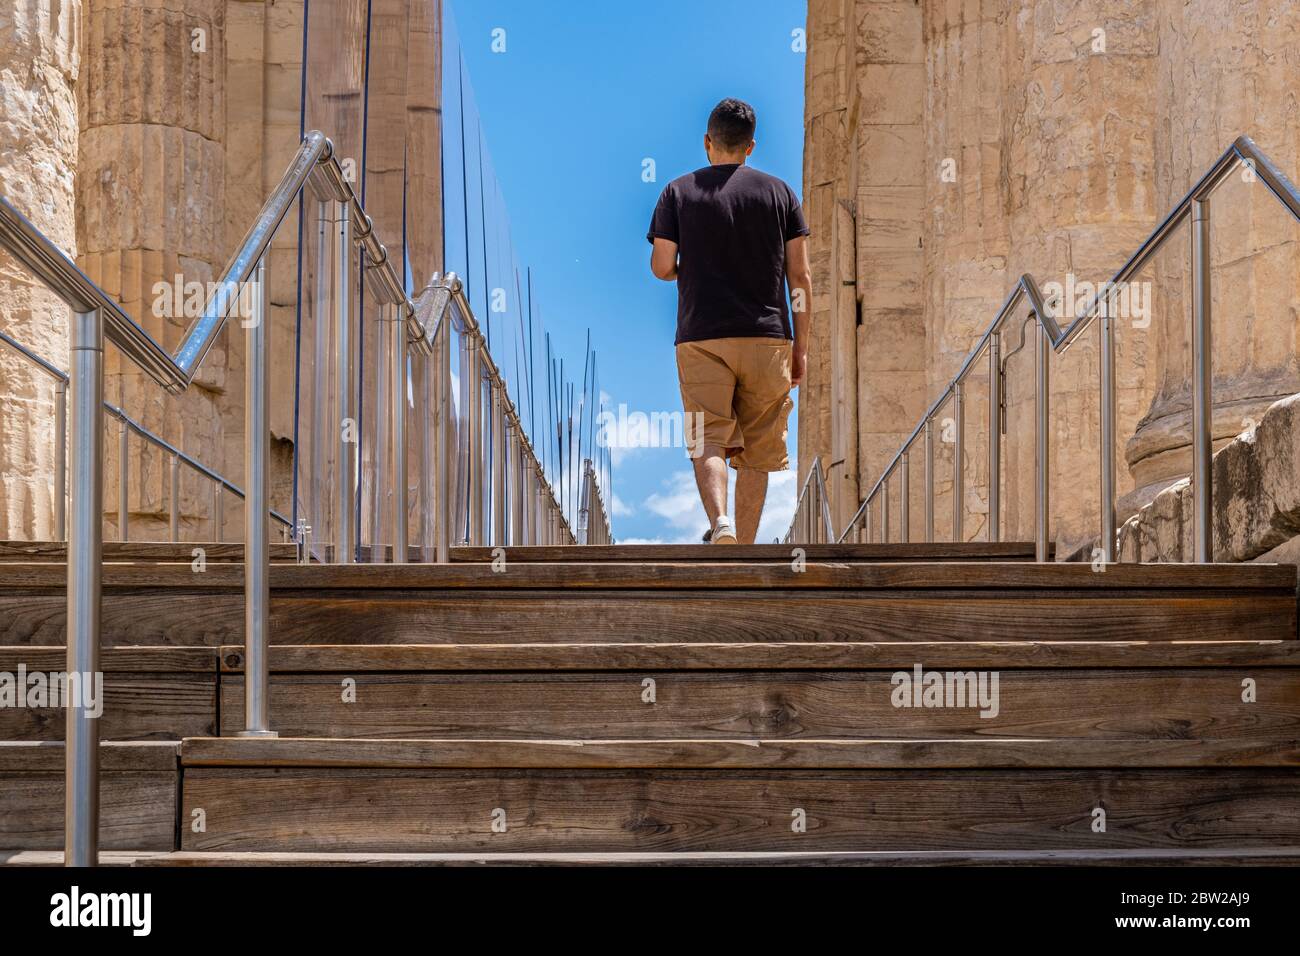 Athens Acropolis, Greece landmark. Young man back view walking alone on wood deck and stairs, Ancient Greek Propylaea, protective partitions measures Stock Photo